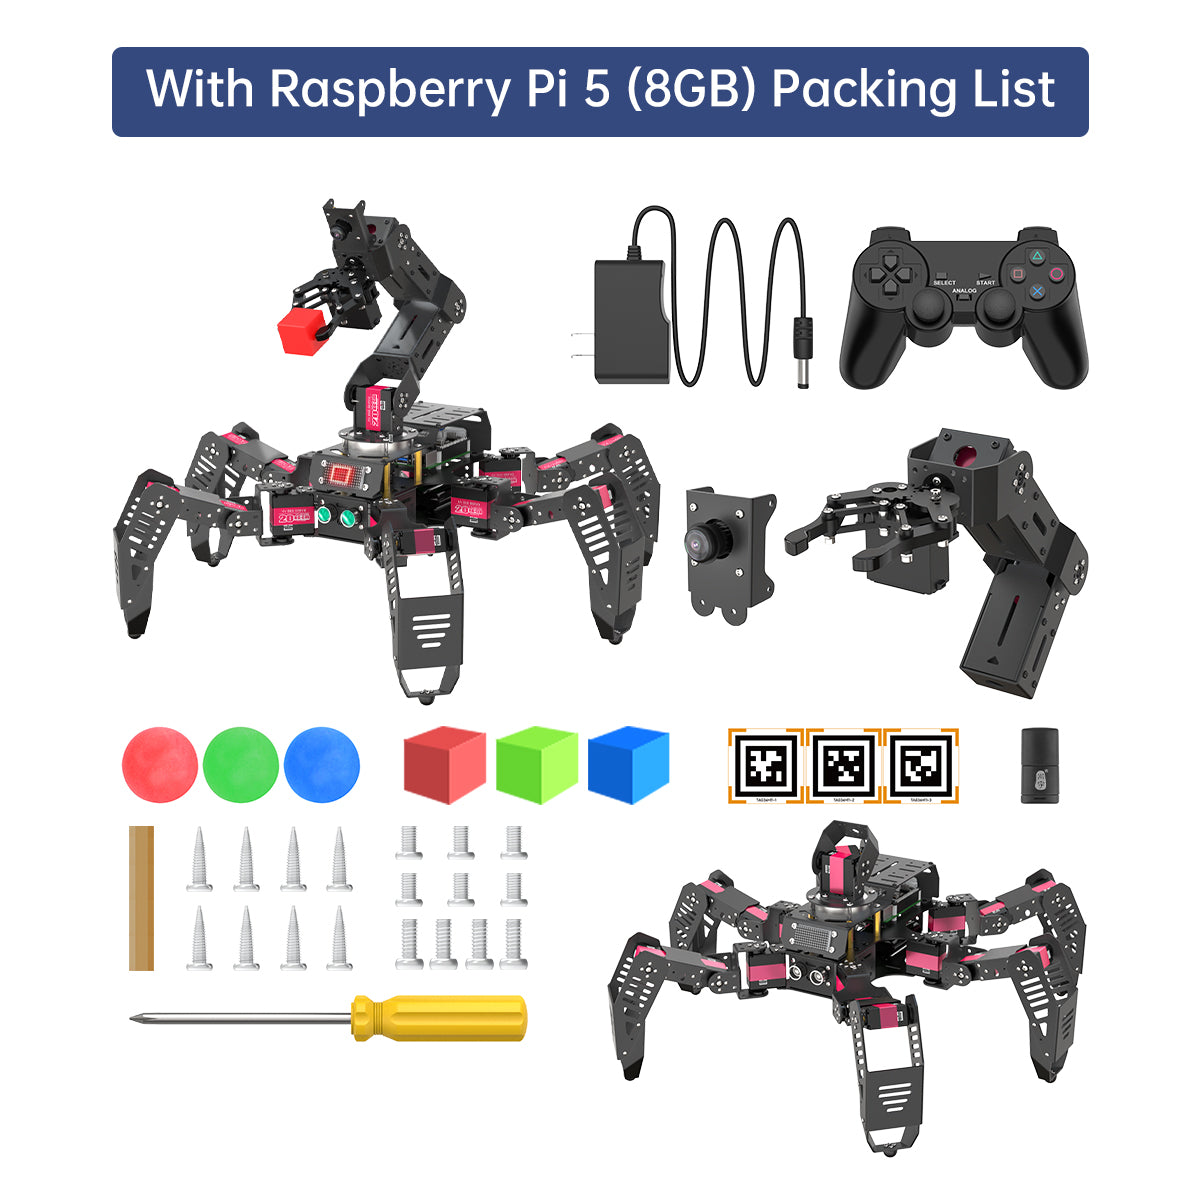 SpiderPi Pro: Hiwonder Hexapod Robot with AI Vision Robotic Arm Powered by Raspberry Pi 5